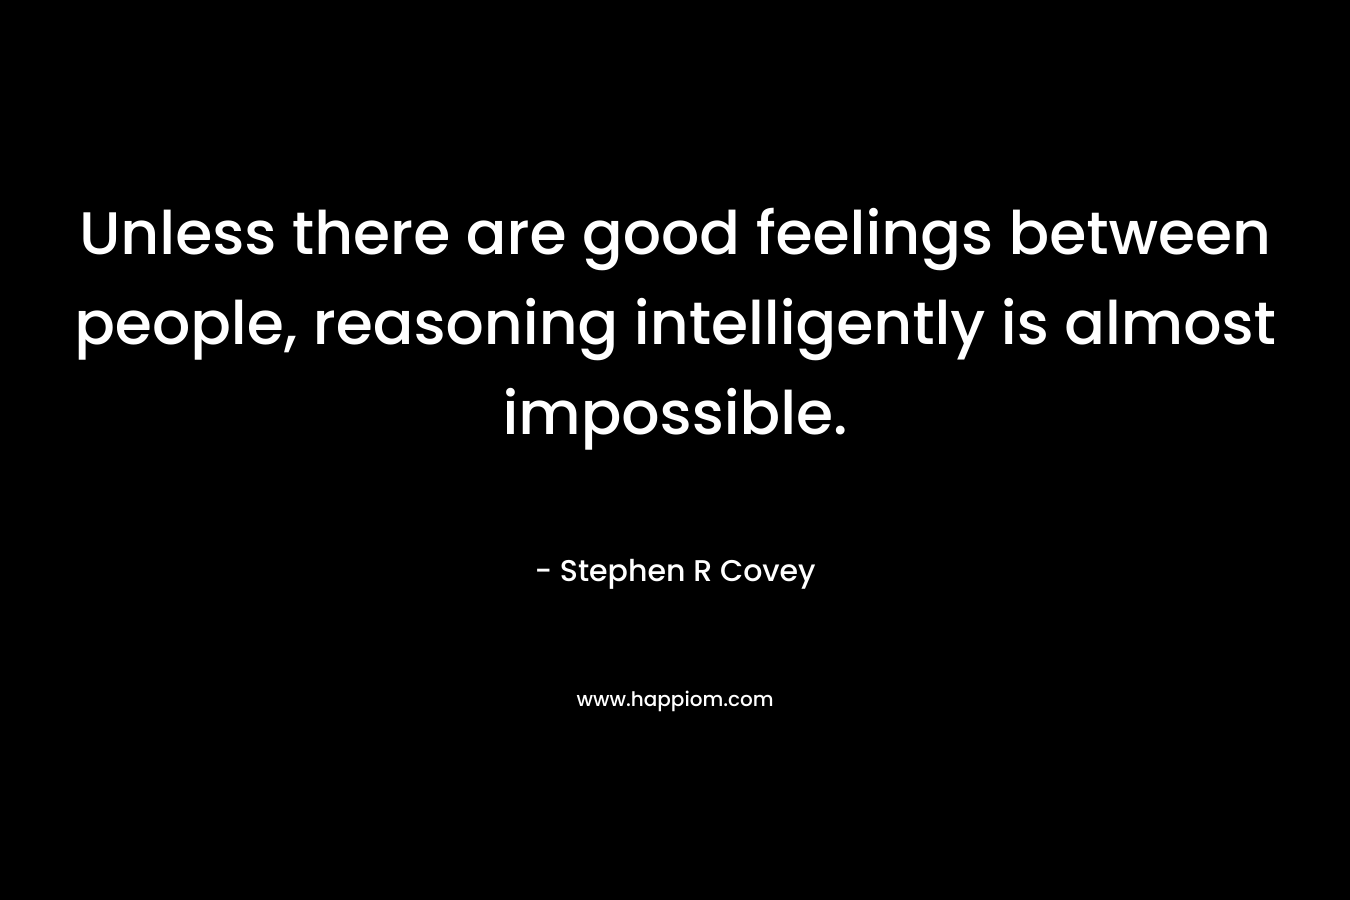 Unless there are good feelings between people, reasoning intelligently is almost impossible.